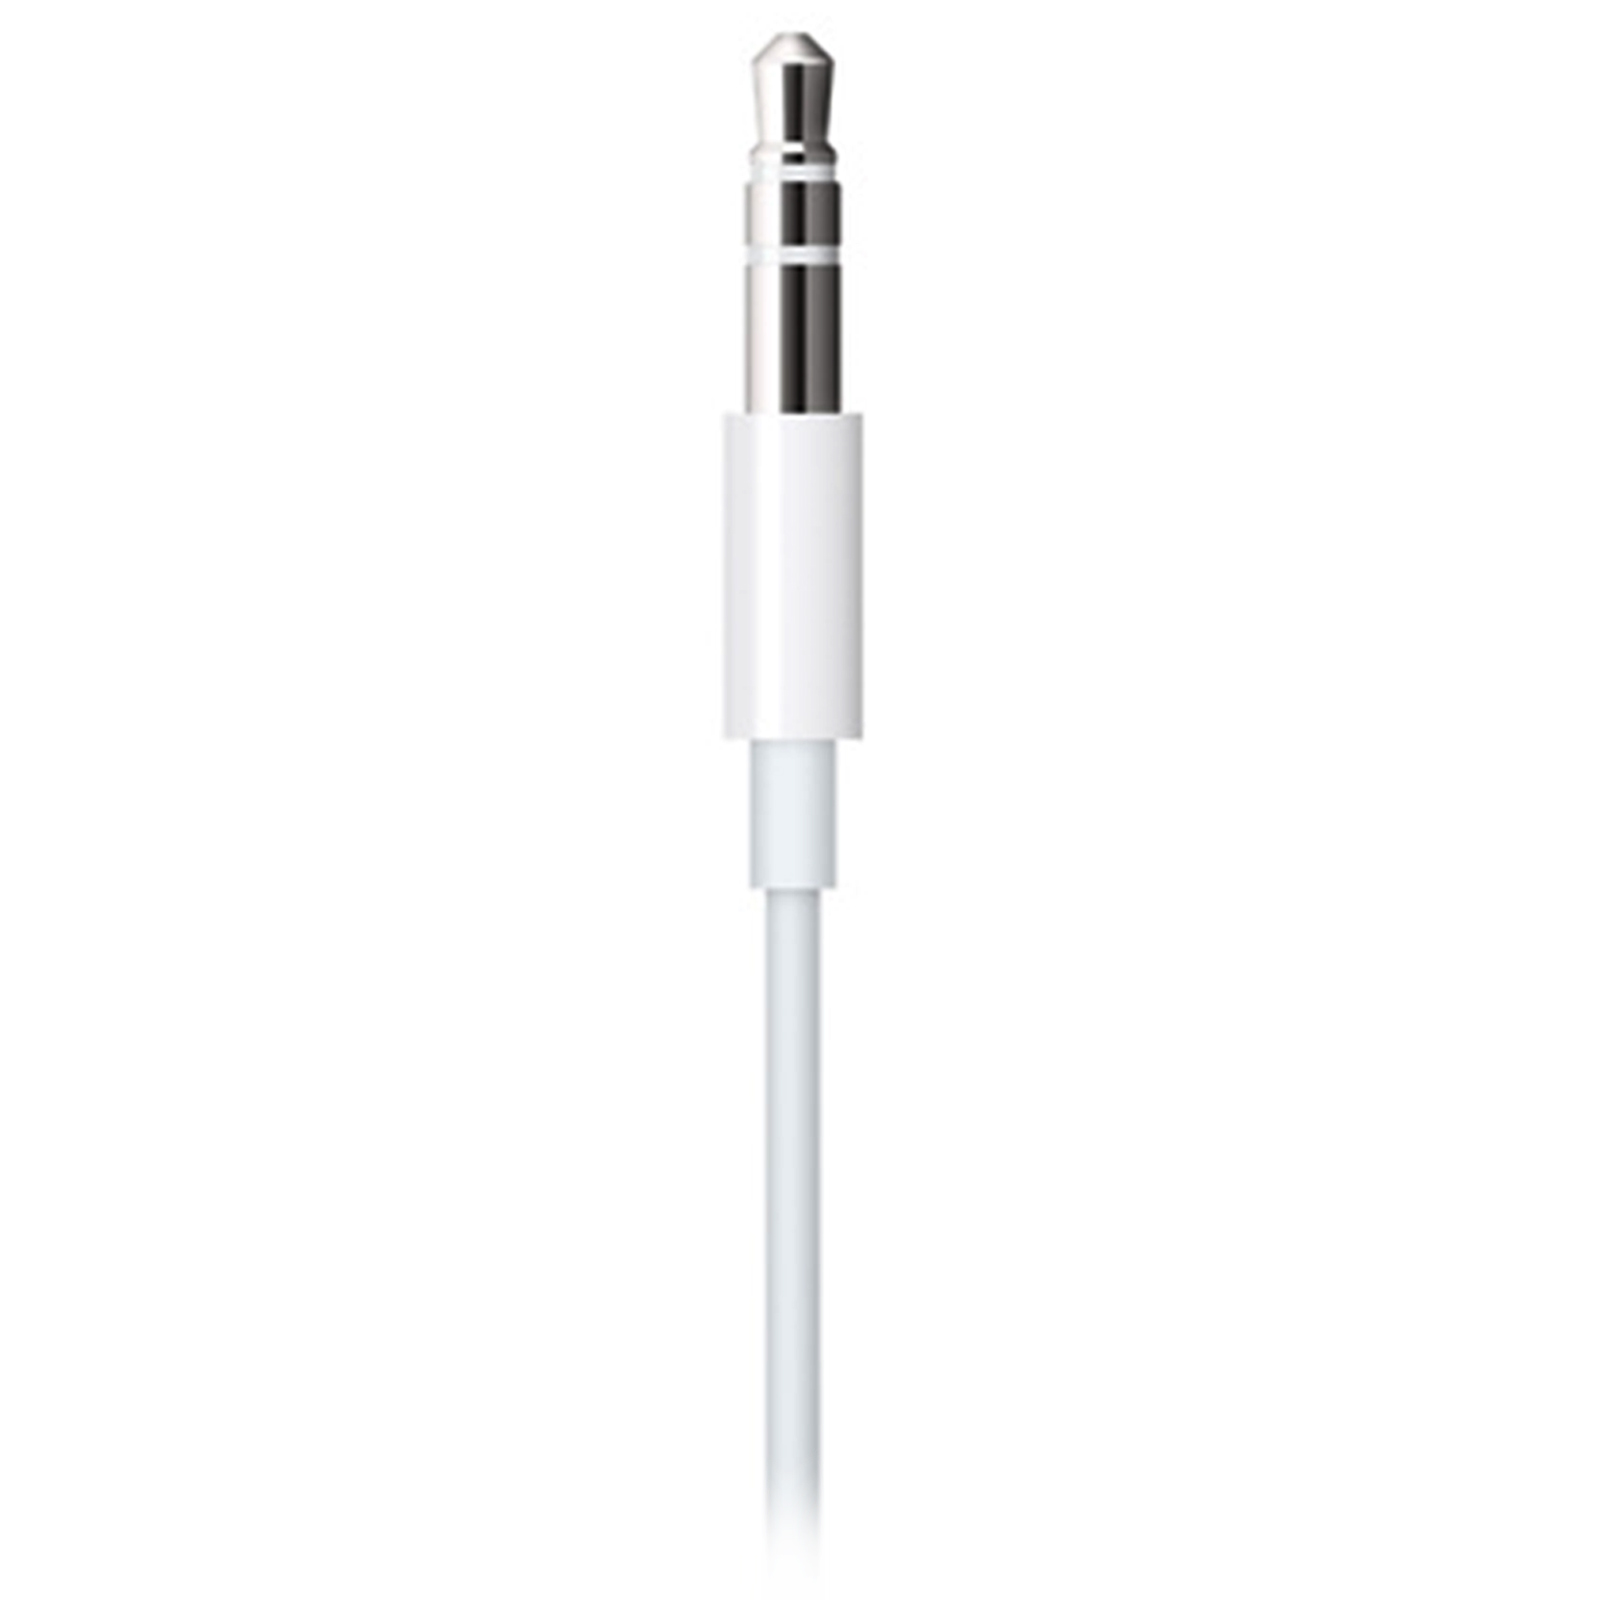 Image of Apple Cable Lightning to 3.5 mm Audio Cable (1.2m) - White